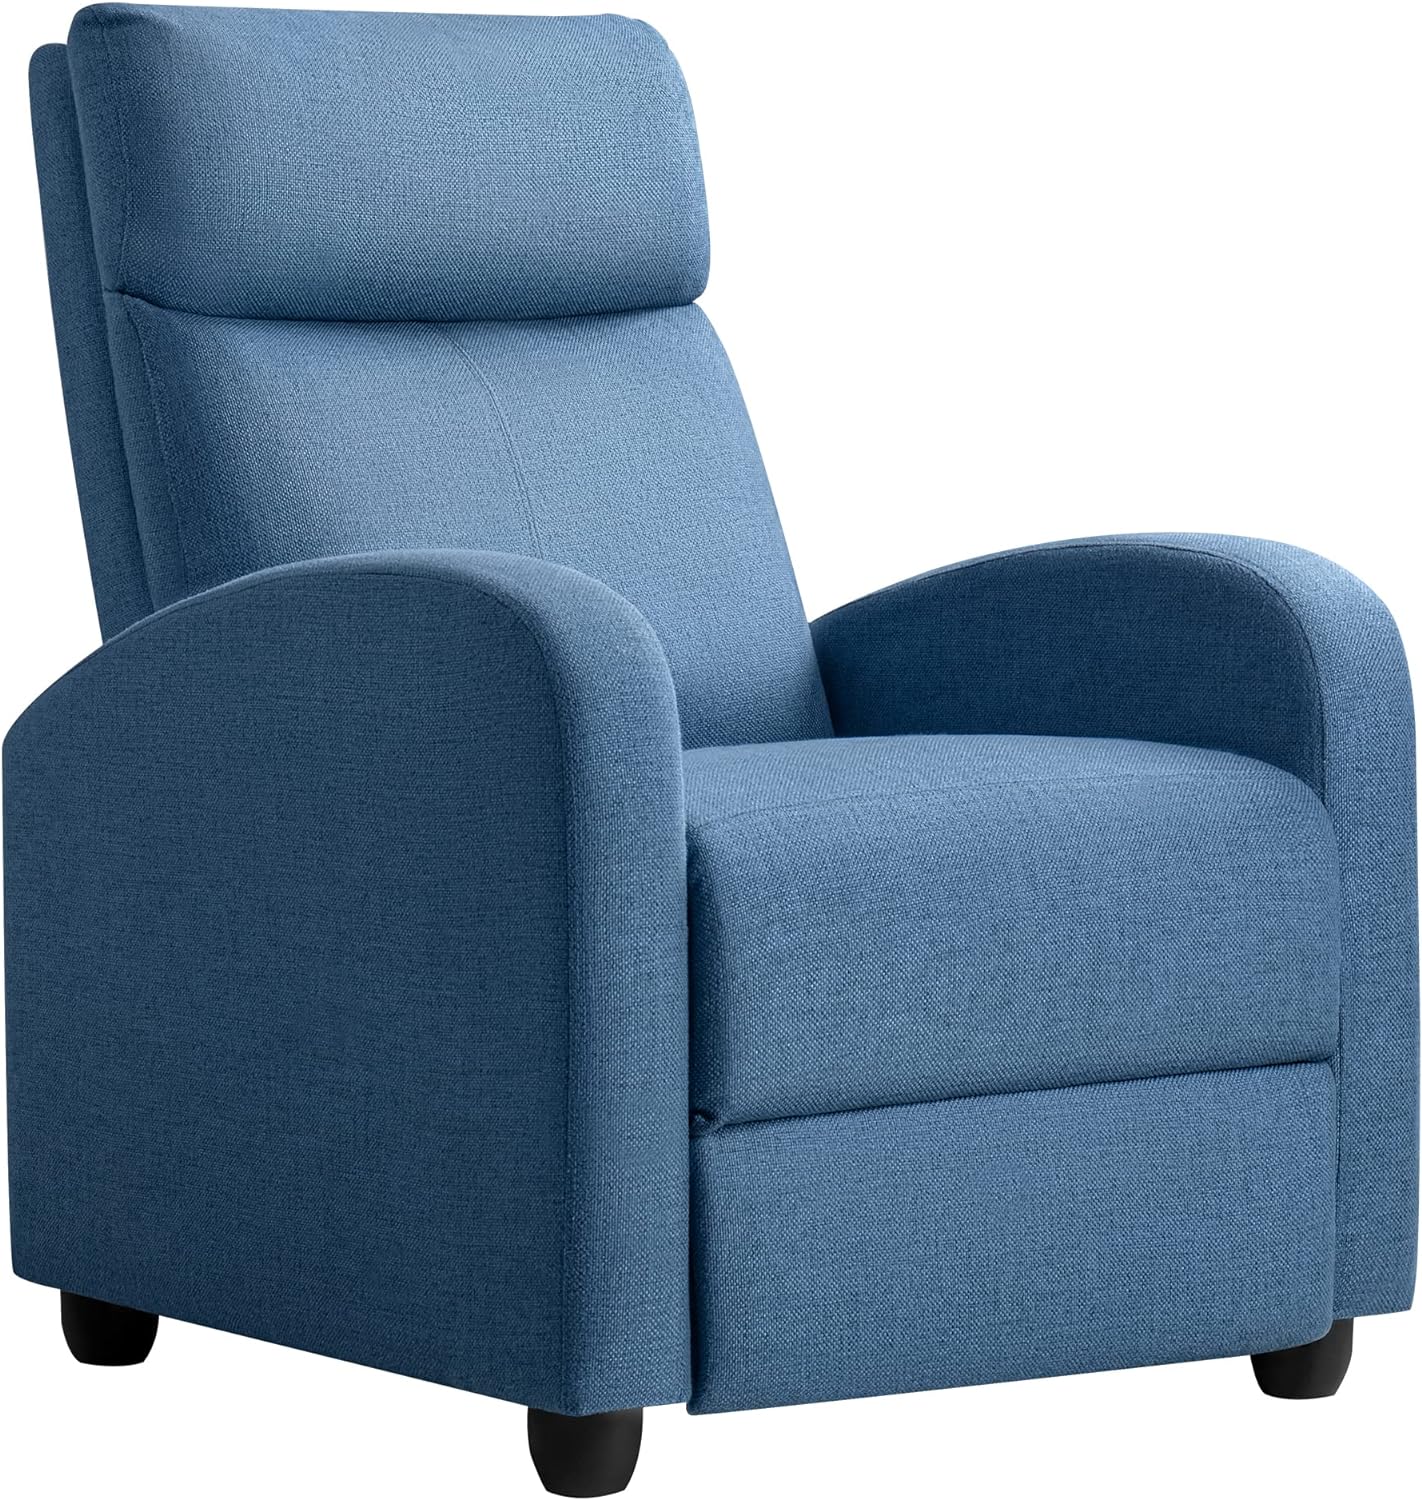 Recliner Chair Adjustable Home Theater Single Fabric Recliner Sofa Furniture with Thick Seat Cushion and Backrest Modern Living Room Recliners (Light-Blue)